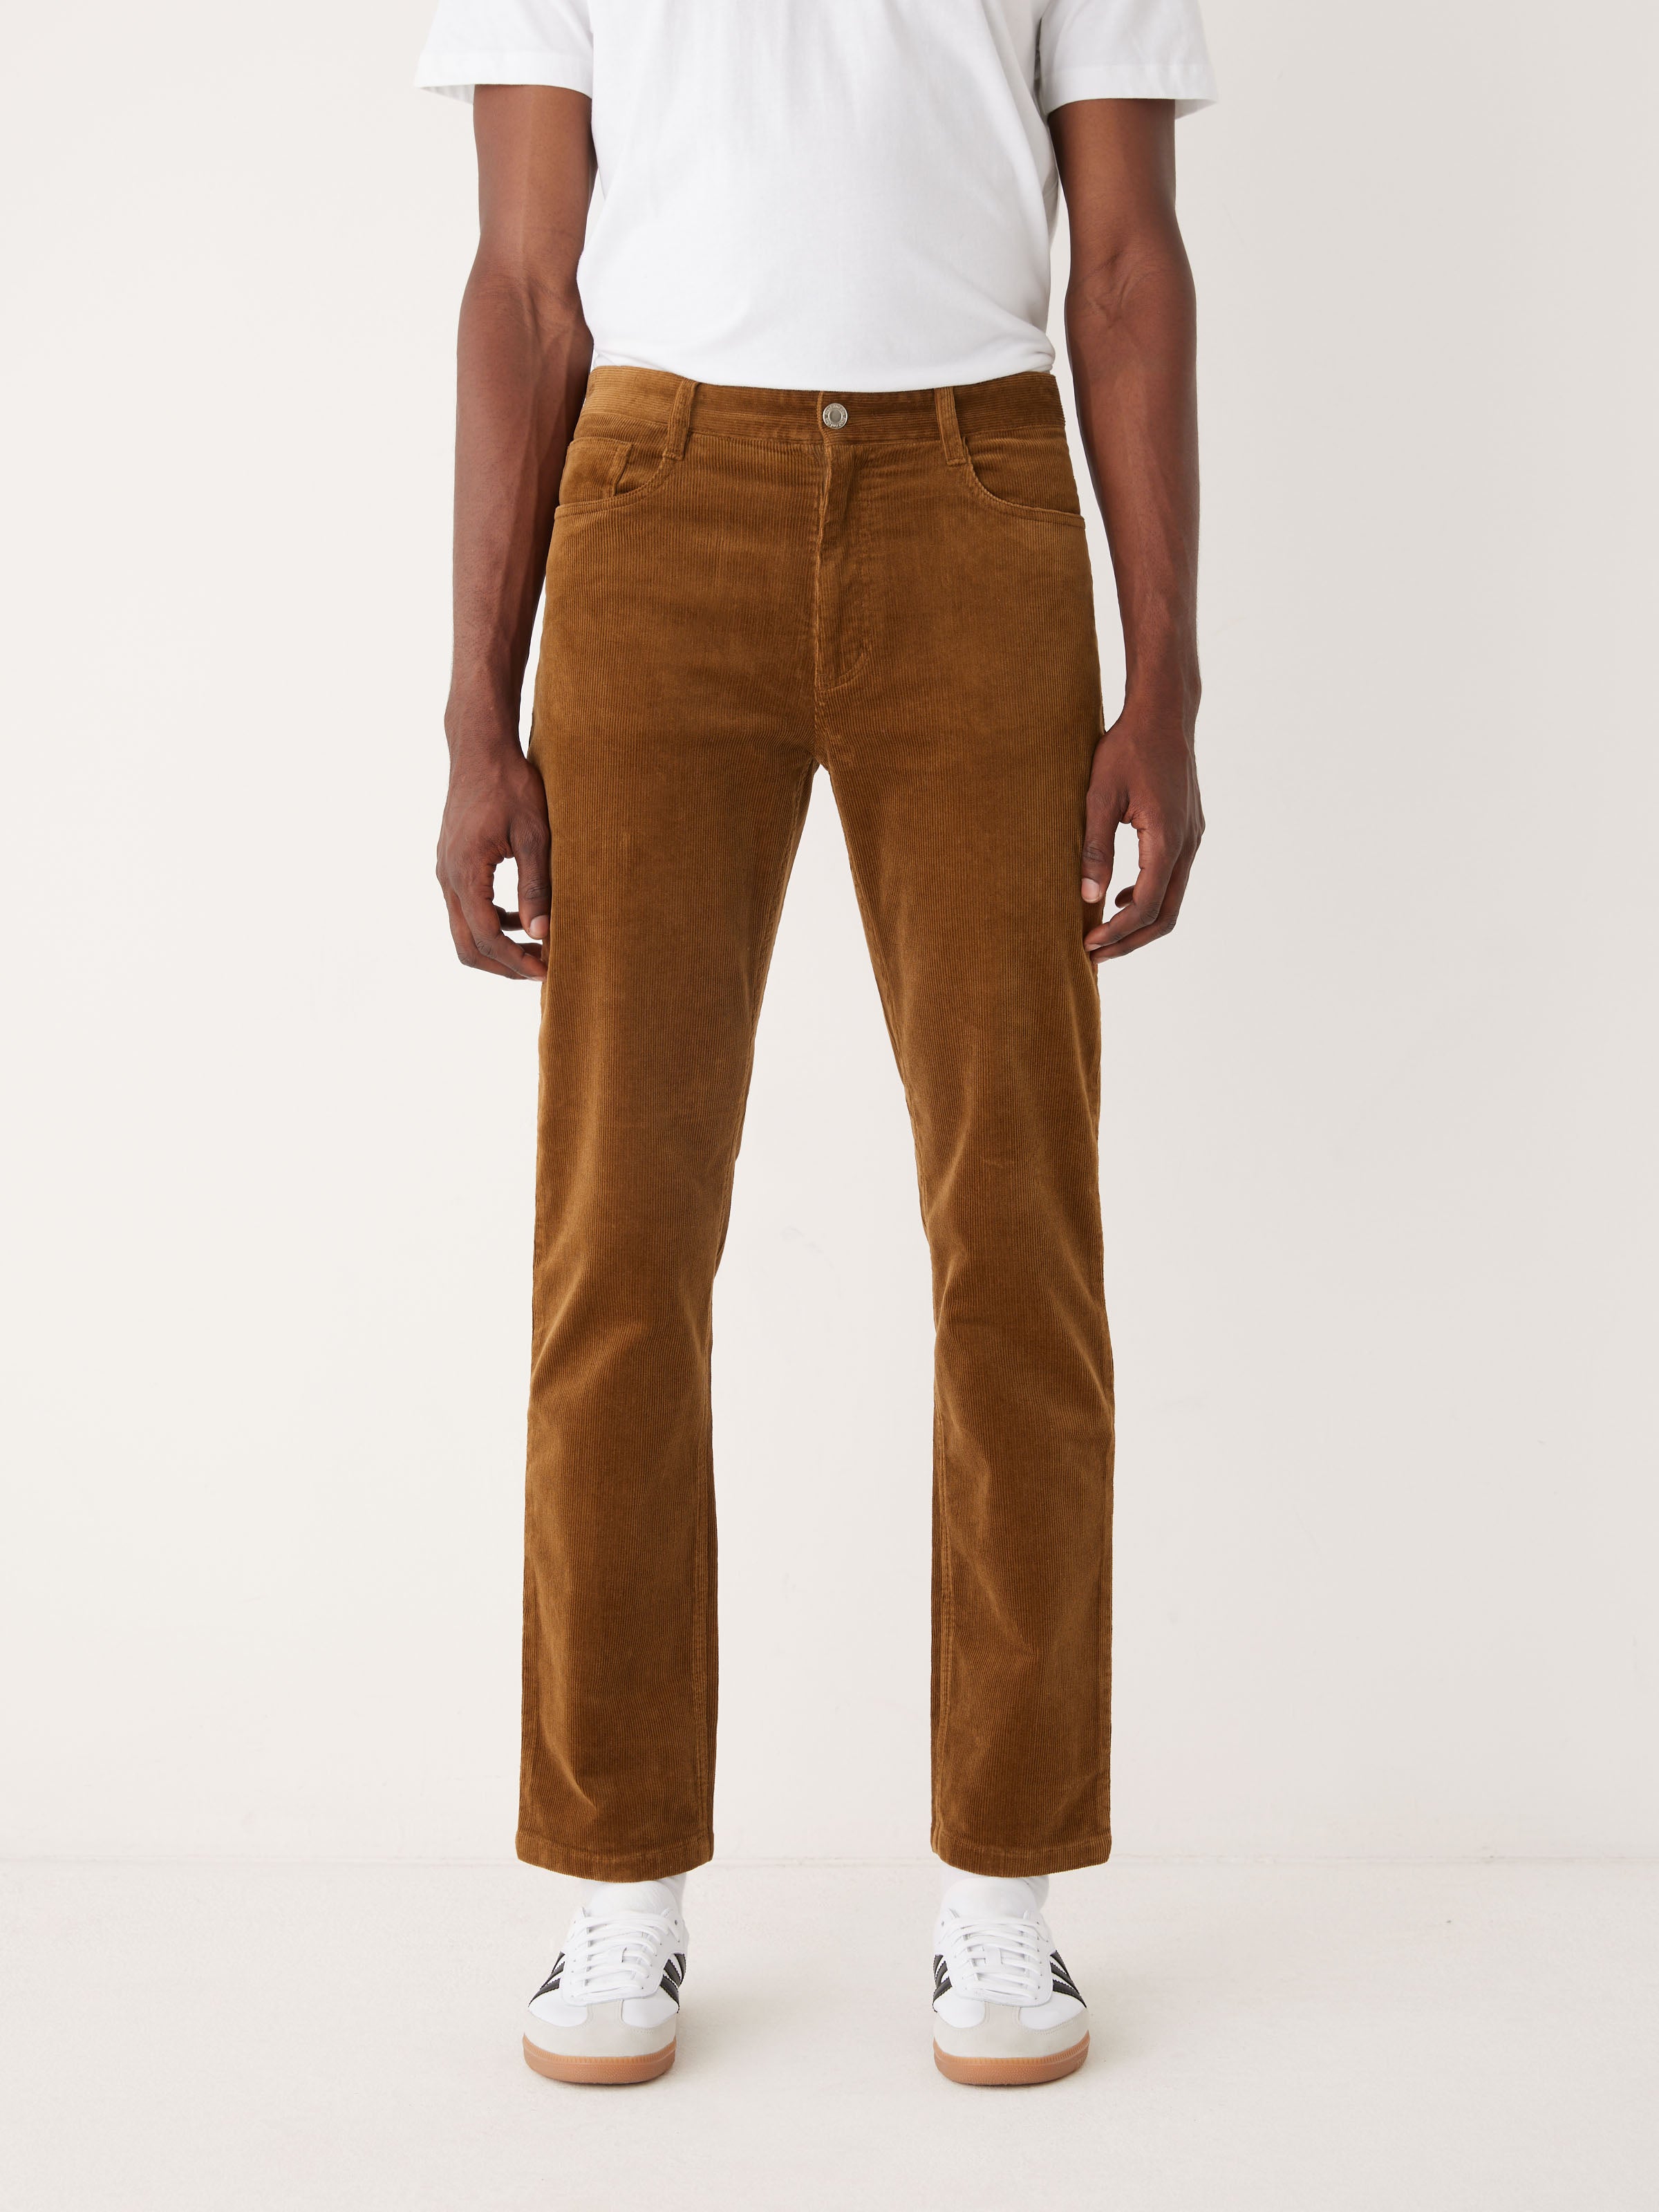 Time is on CLASSIC CORDUROY TROUSER